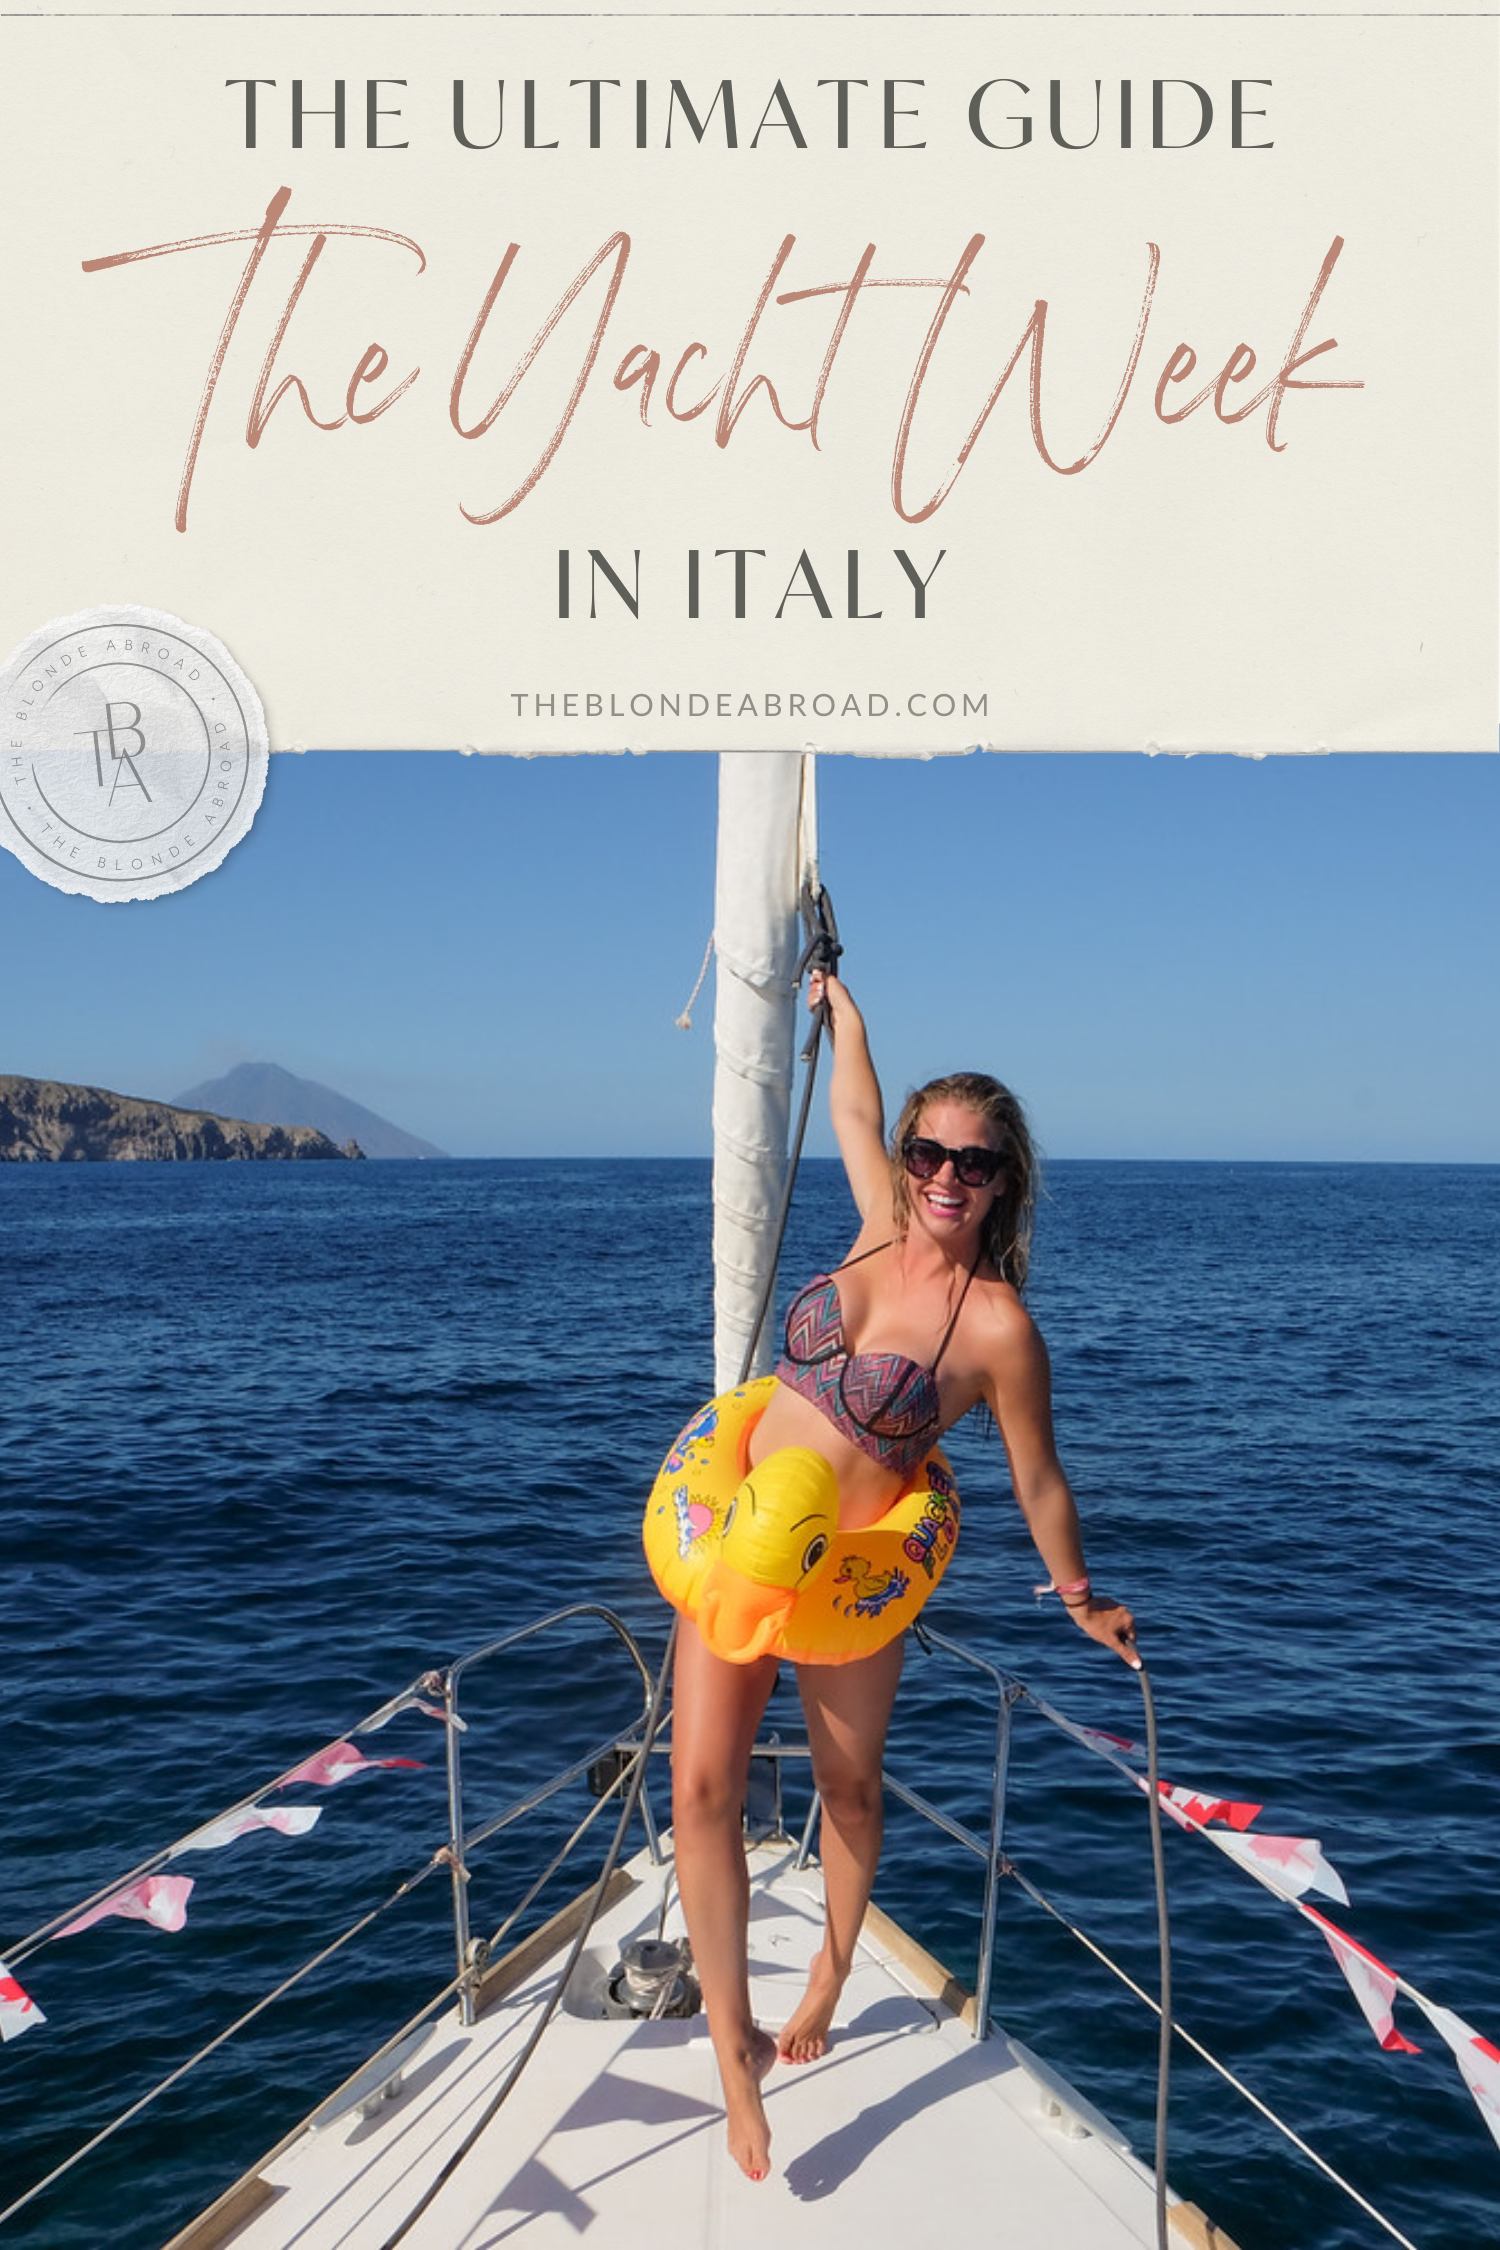 The Ultimate Guide to The Yacht Week Italy